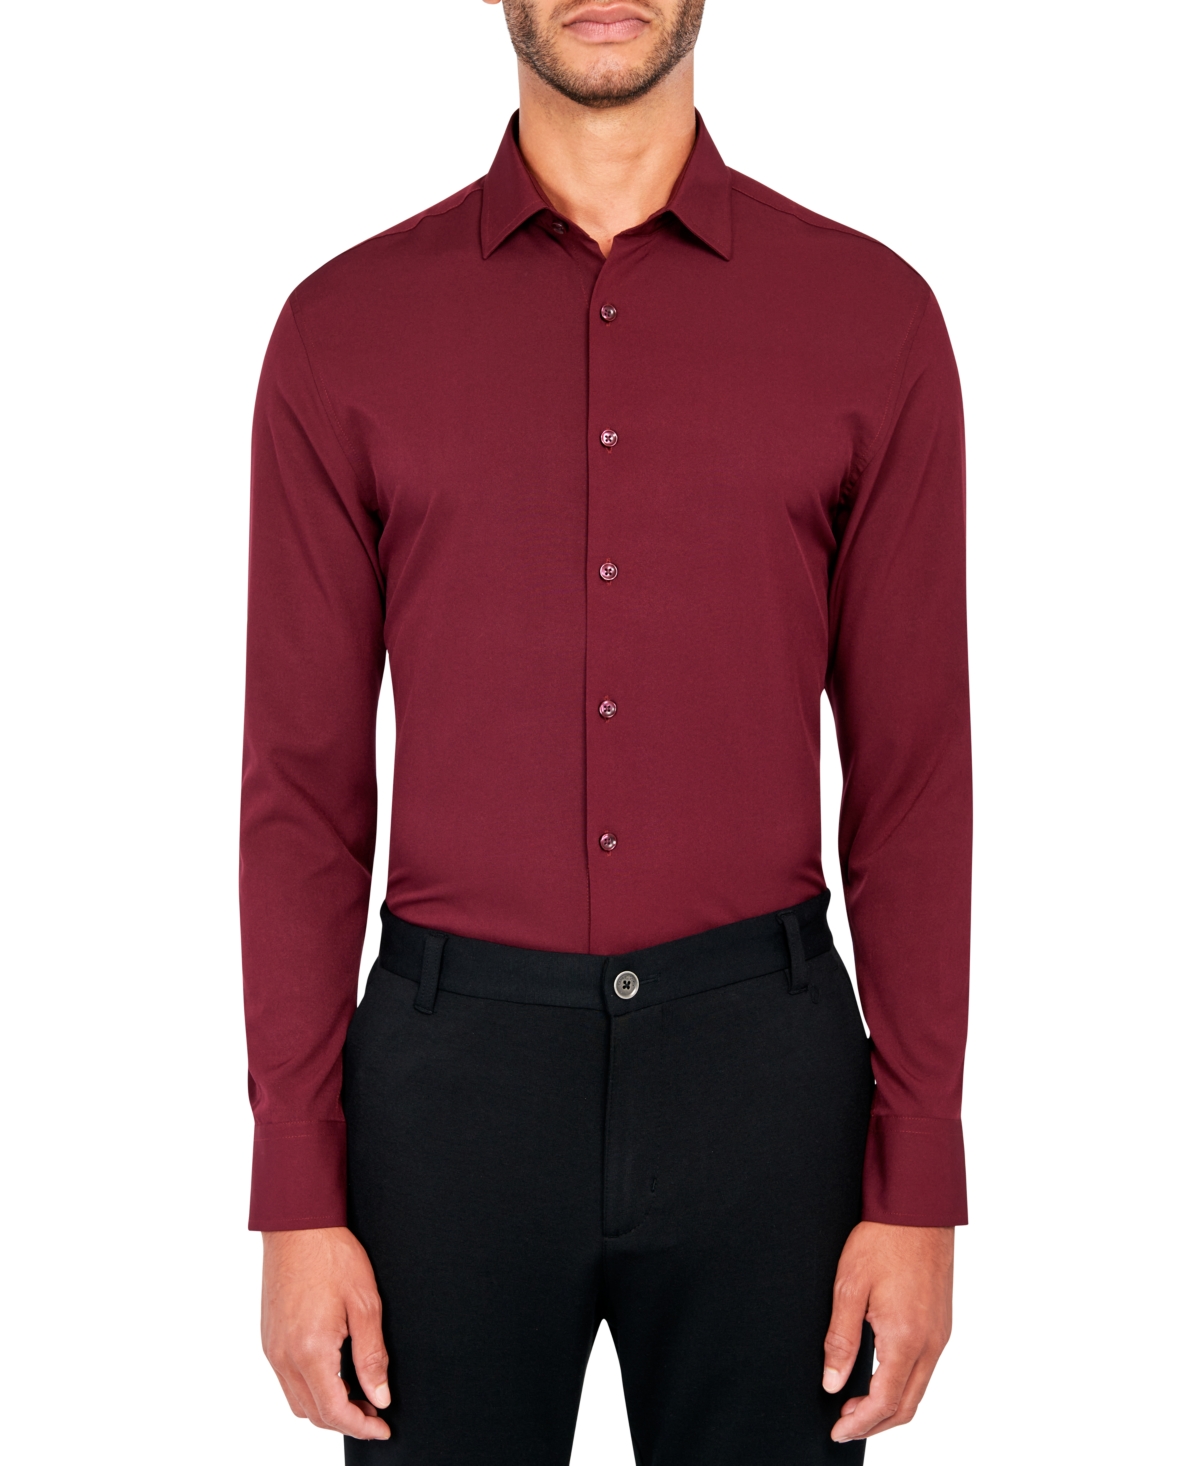 Shop Construct Ceremony Men's Solid Performance Stretch Cooling Comfort Dress Shirt In Wine